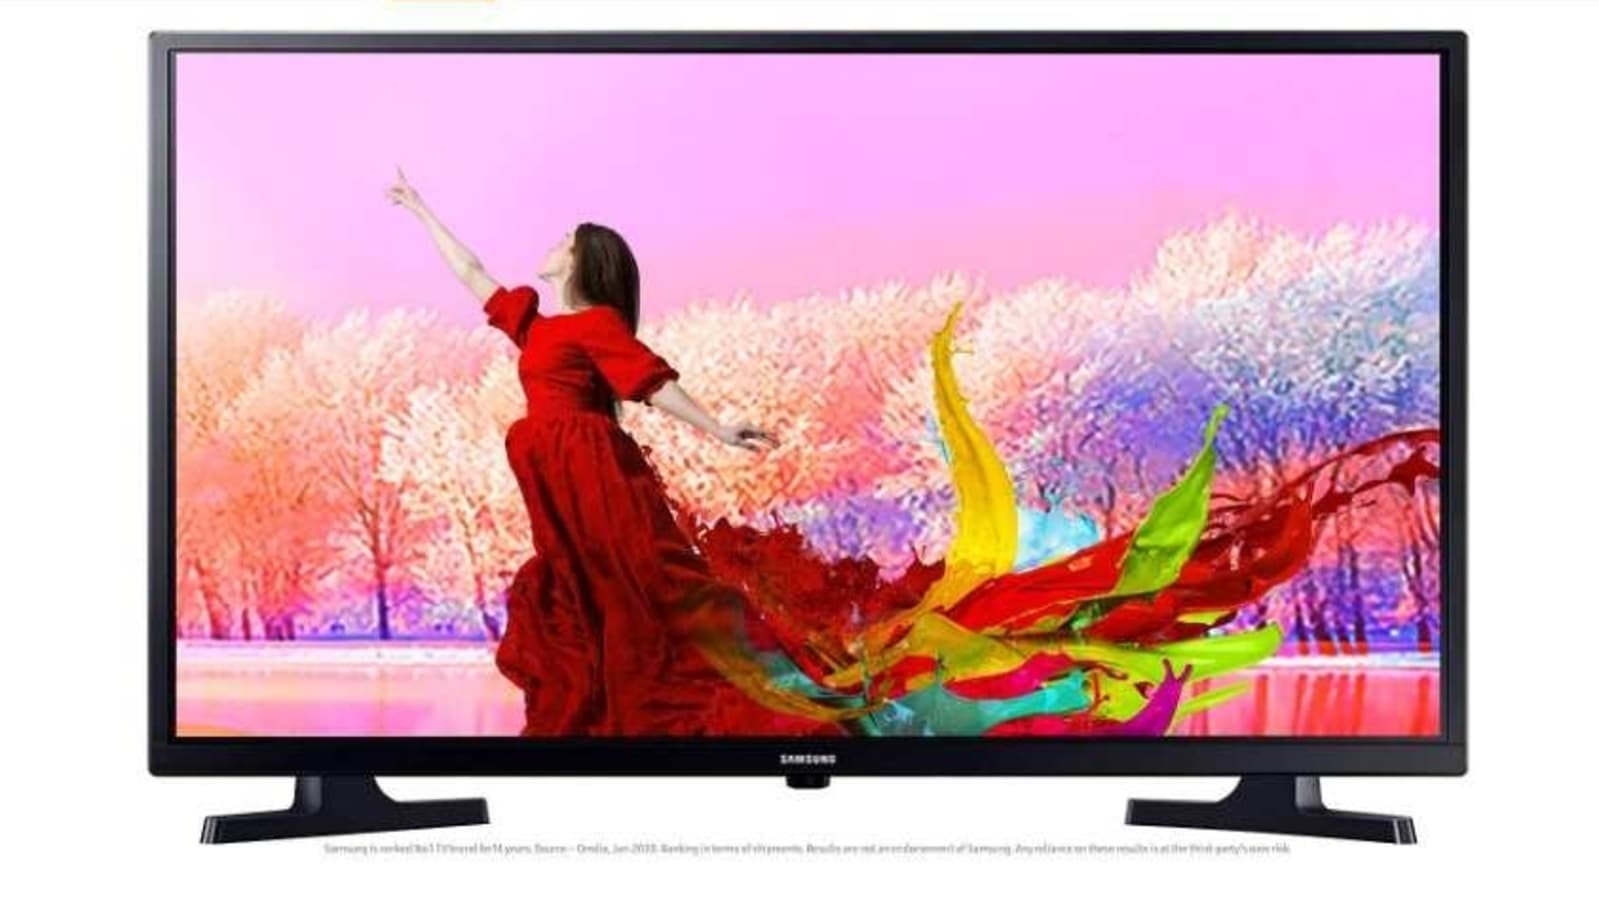 Samsung LED Smart TV sale on Amazon; price drops from Rs. 22900 to Rs. 13490